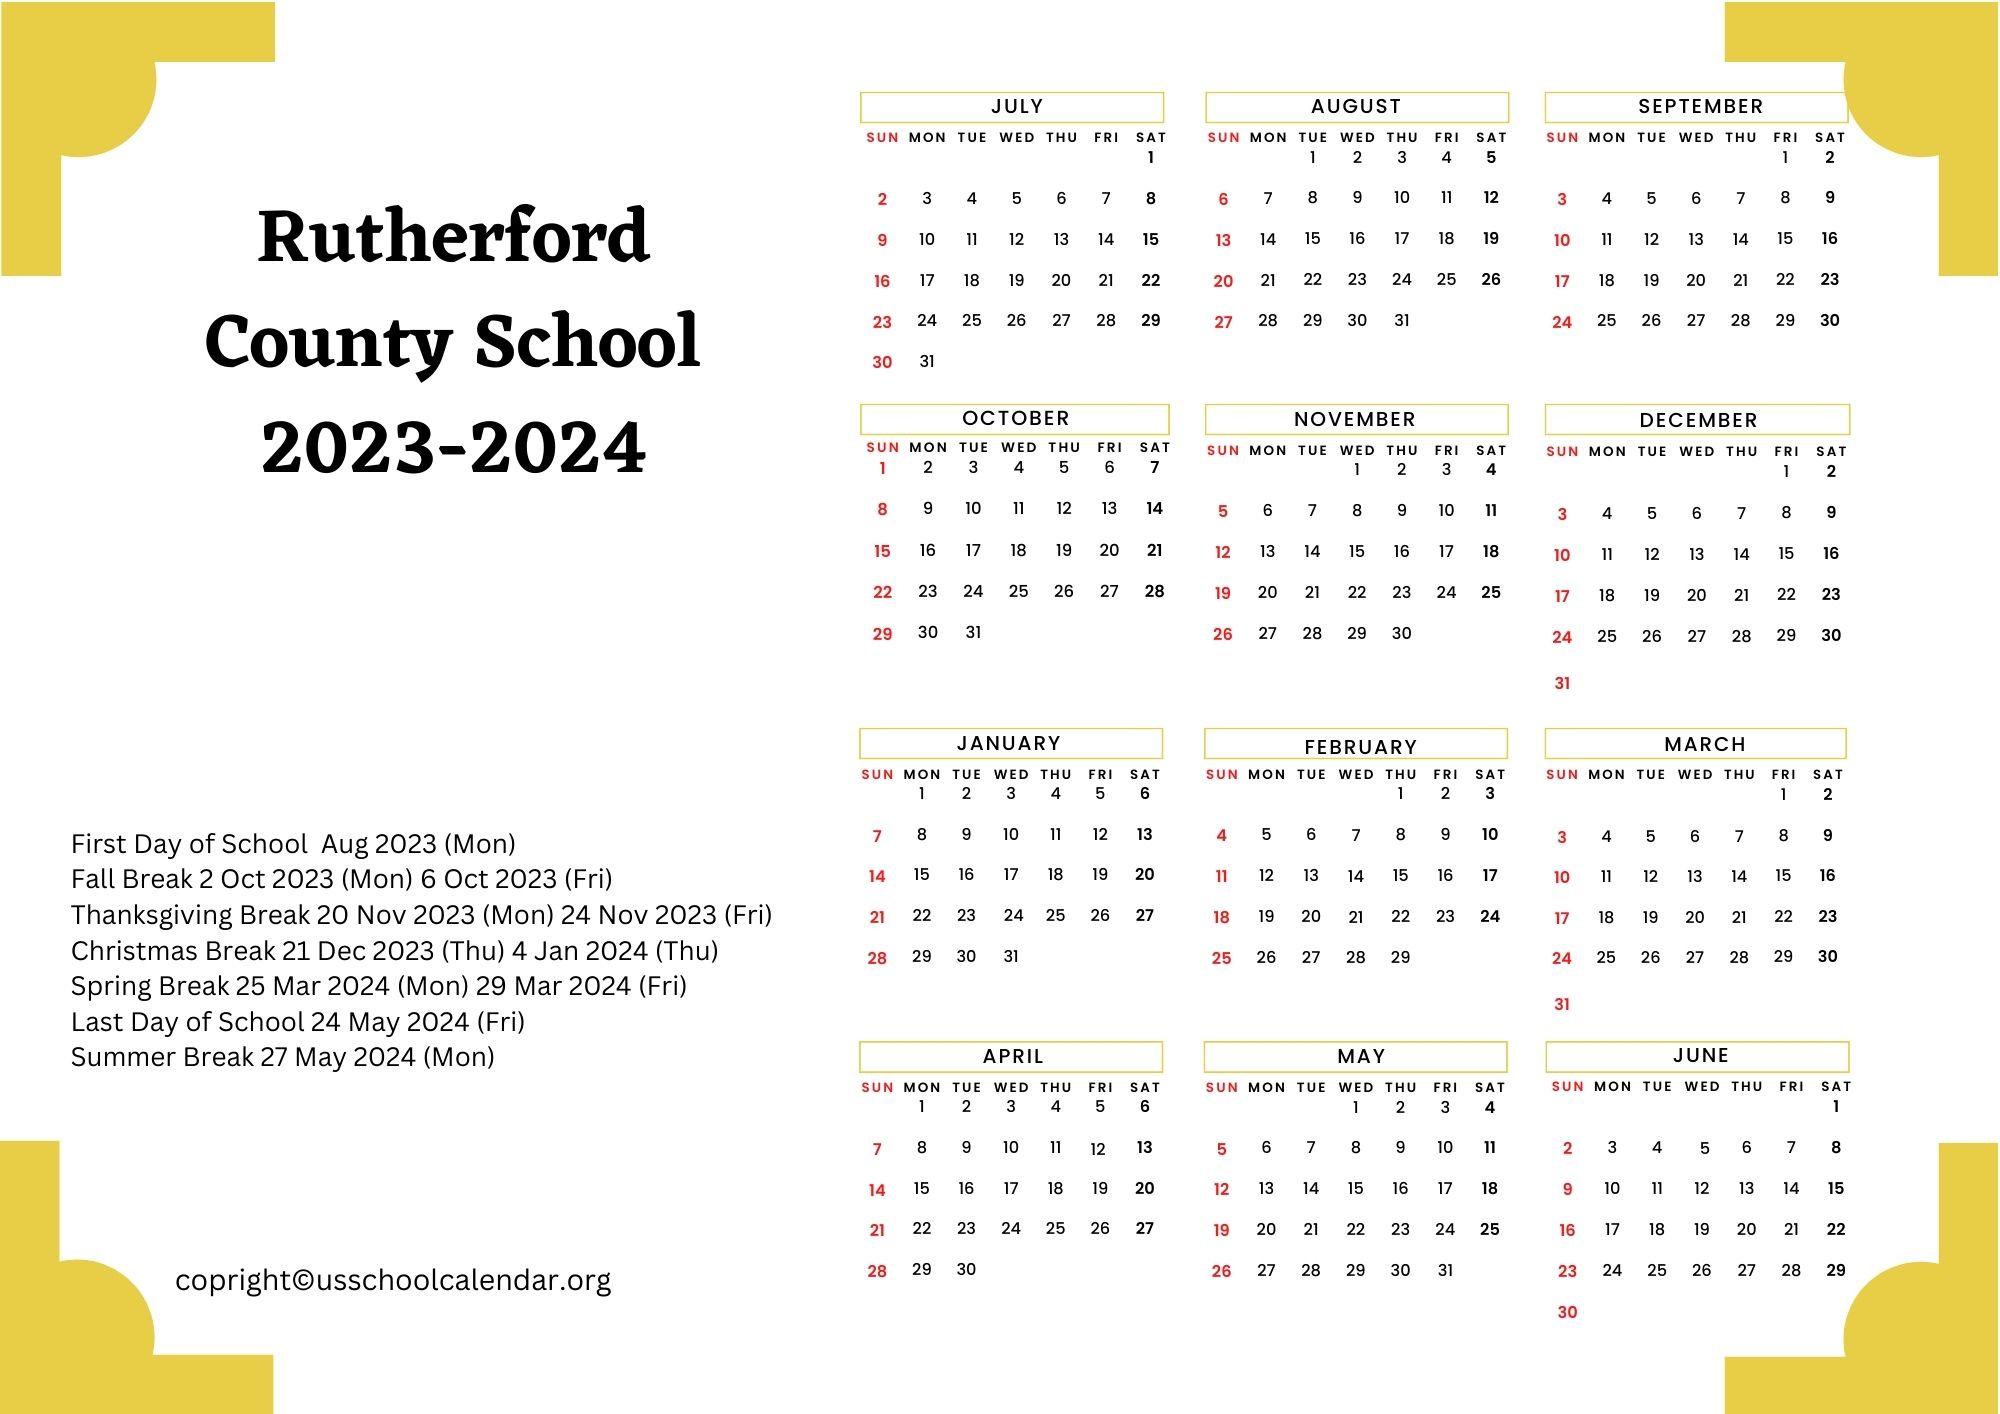 rutherford-county-school-calendar-with-holidays-2023-2024